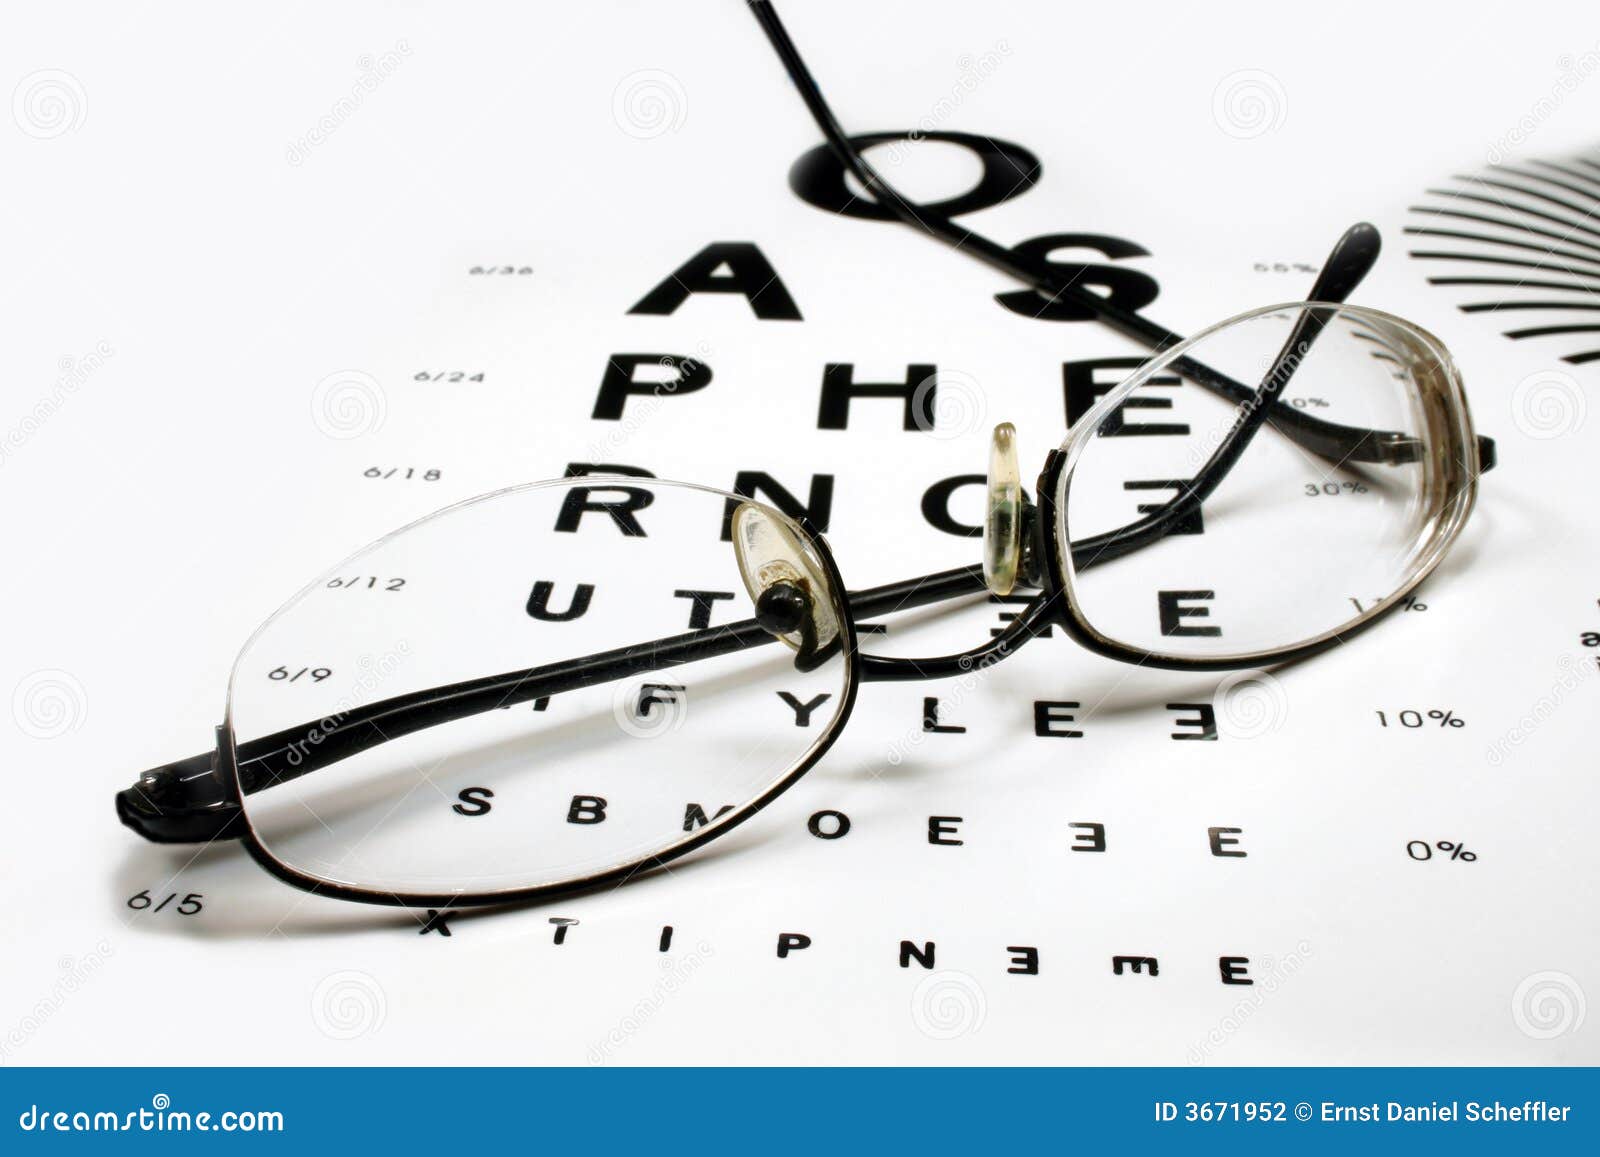 eye chart with spectacles